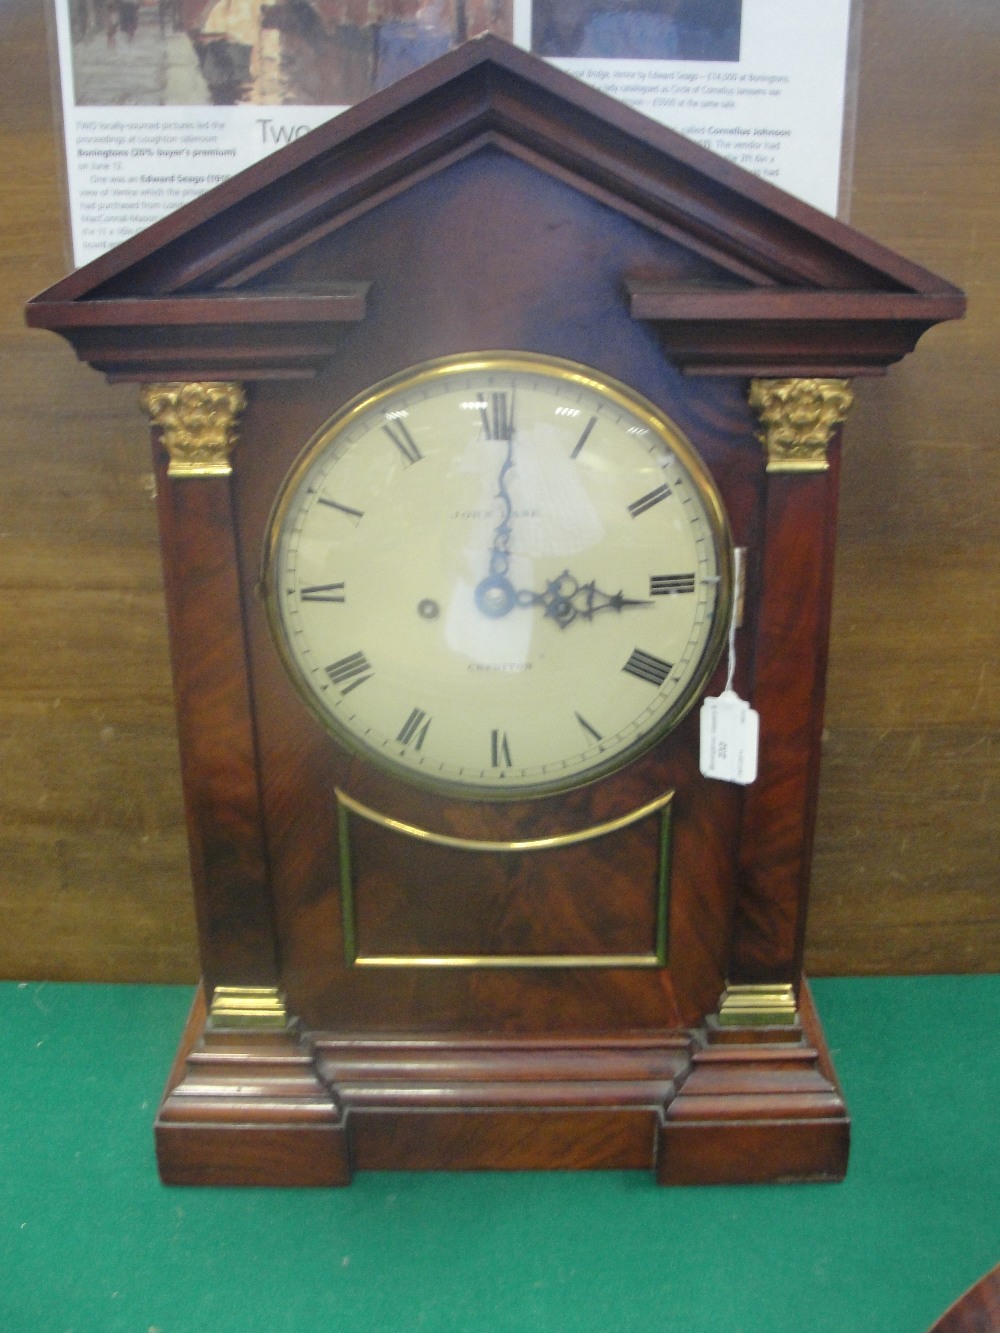 A 19th Century Library Clock by John Lane of Crediton:
large mahogany case with architectural